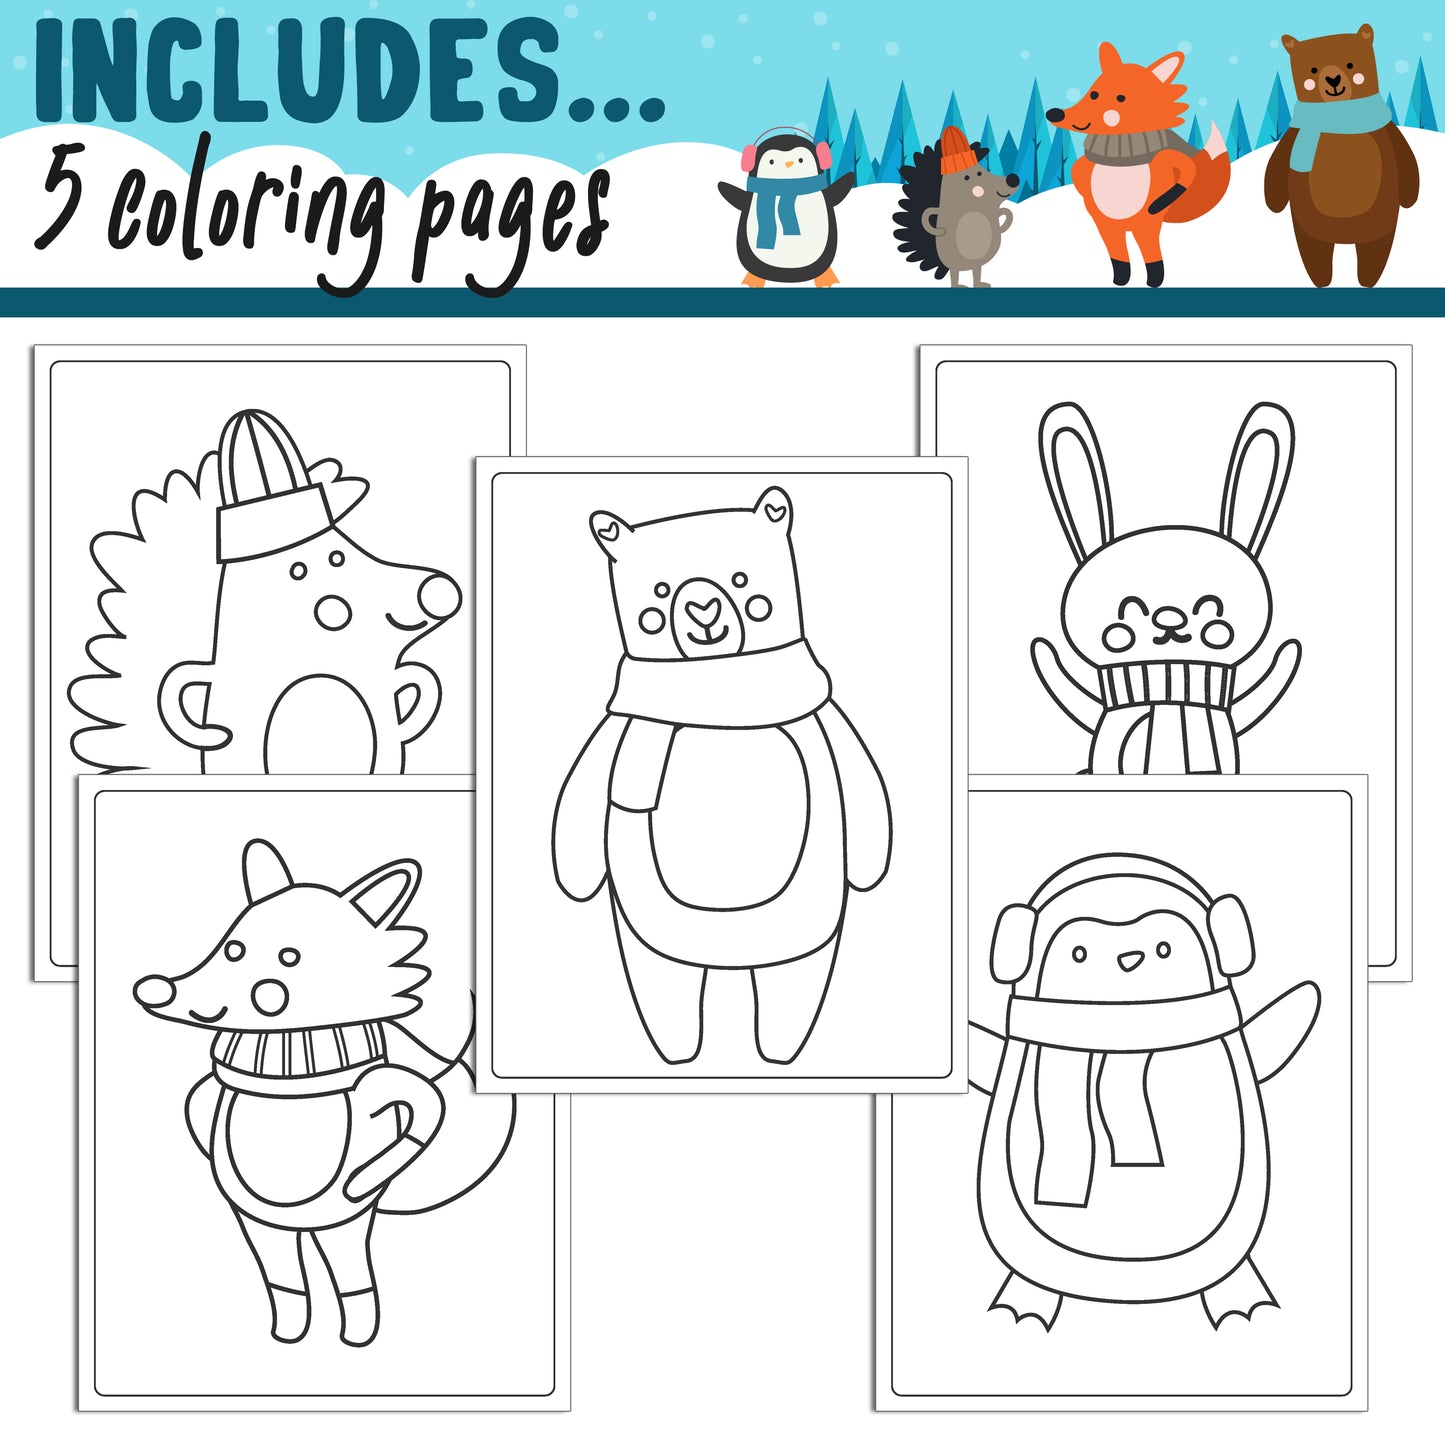 Learn How to Draw a Winter Animal: Directed Drawing Step by Step Tutorial, Includes 5 Coloring Pages, PDF File, Instant Download.